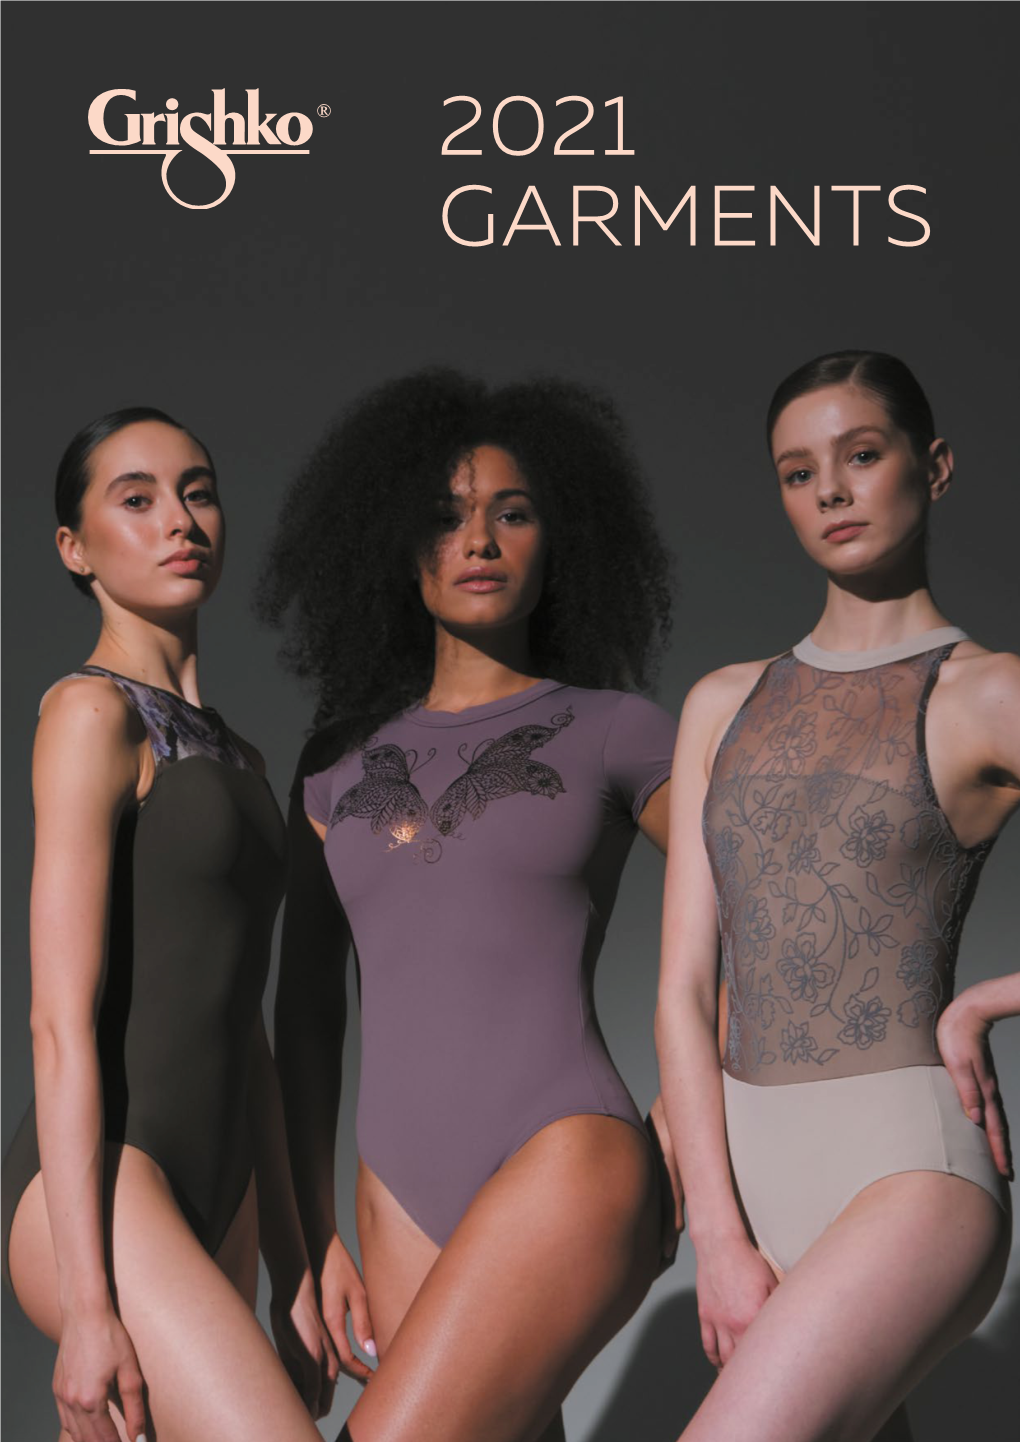 2021 Garments Material Features Concentrate of Grishko® Leotards